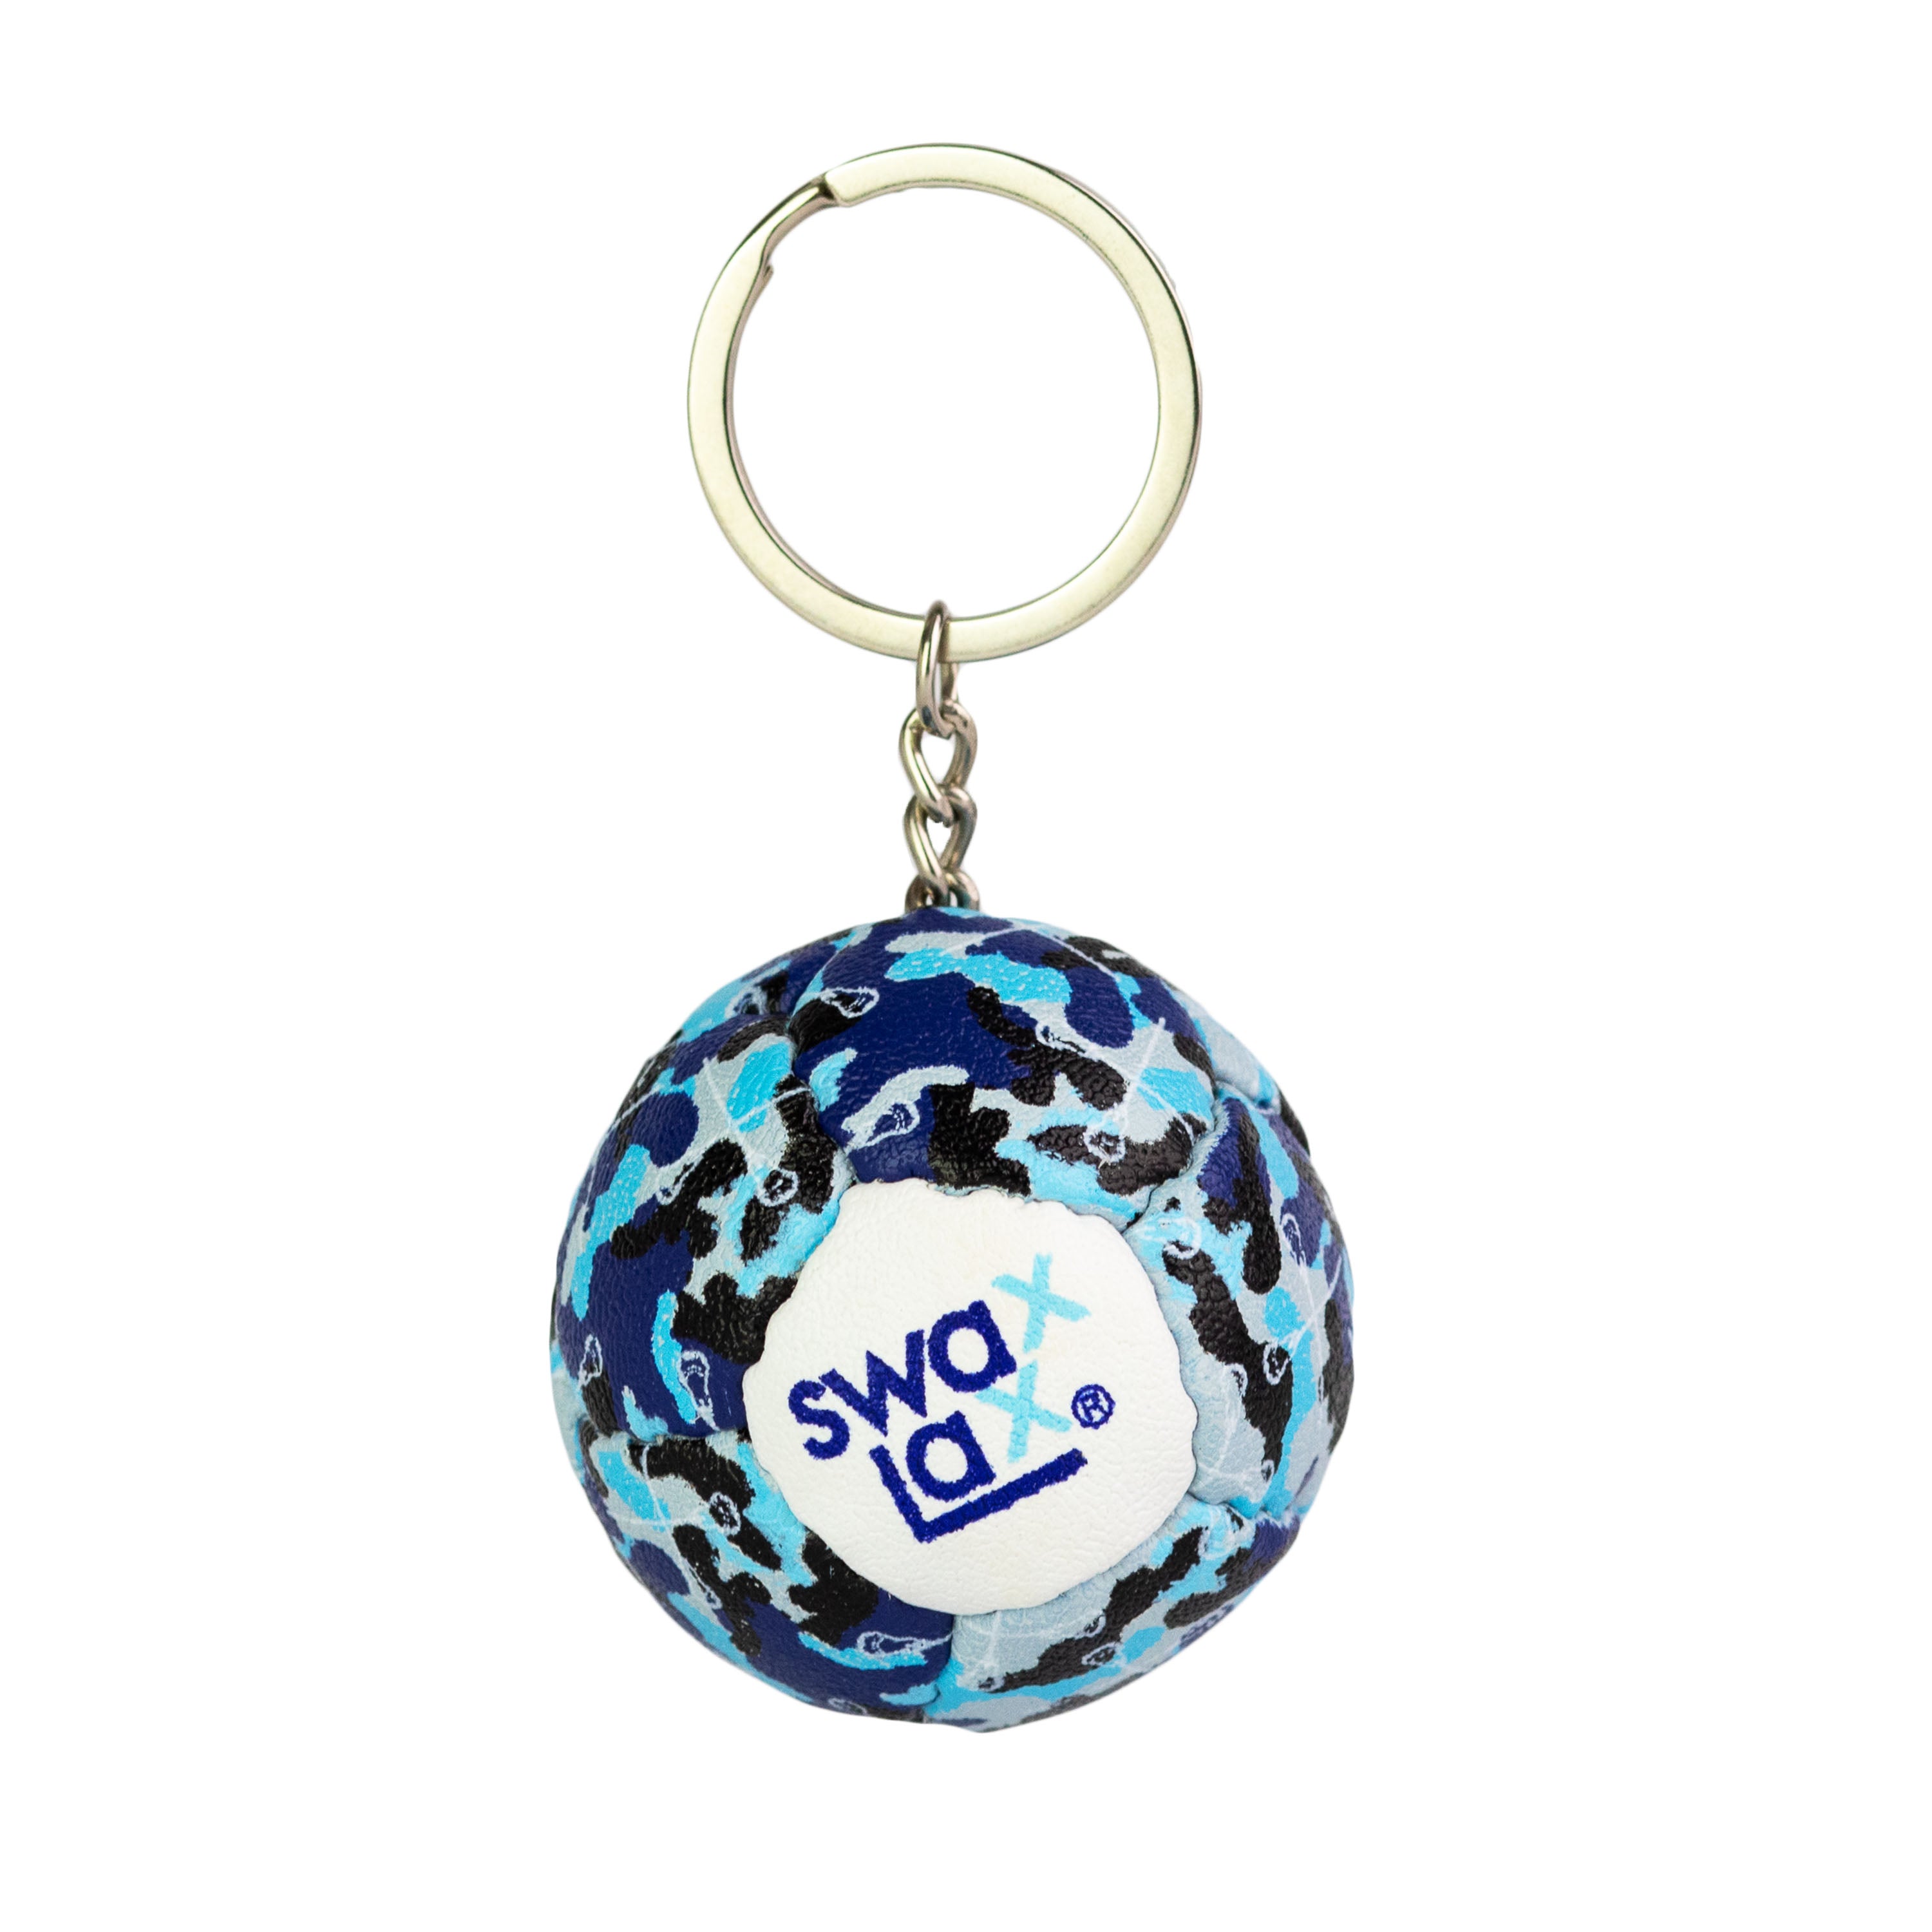 Blue Camo Stick Swax Lax Keychain Swag Collectible